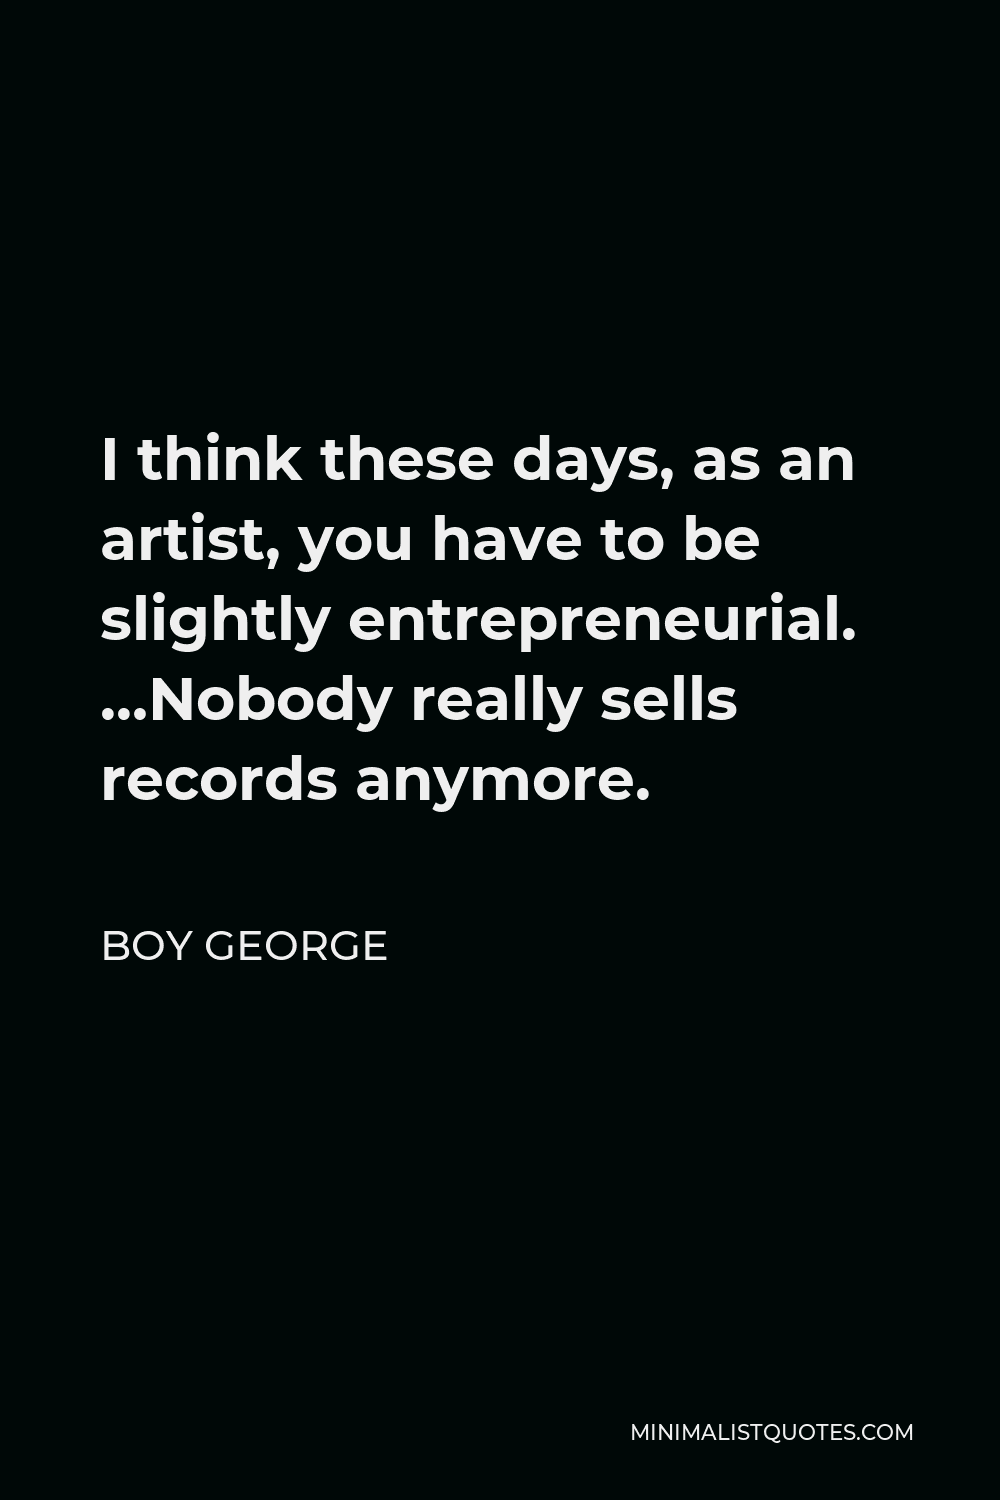 Boy George Quote - I think these days, as an artist, you have to be slightly entrepreneurial. …Nobody really sells records anymore.